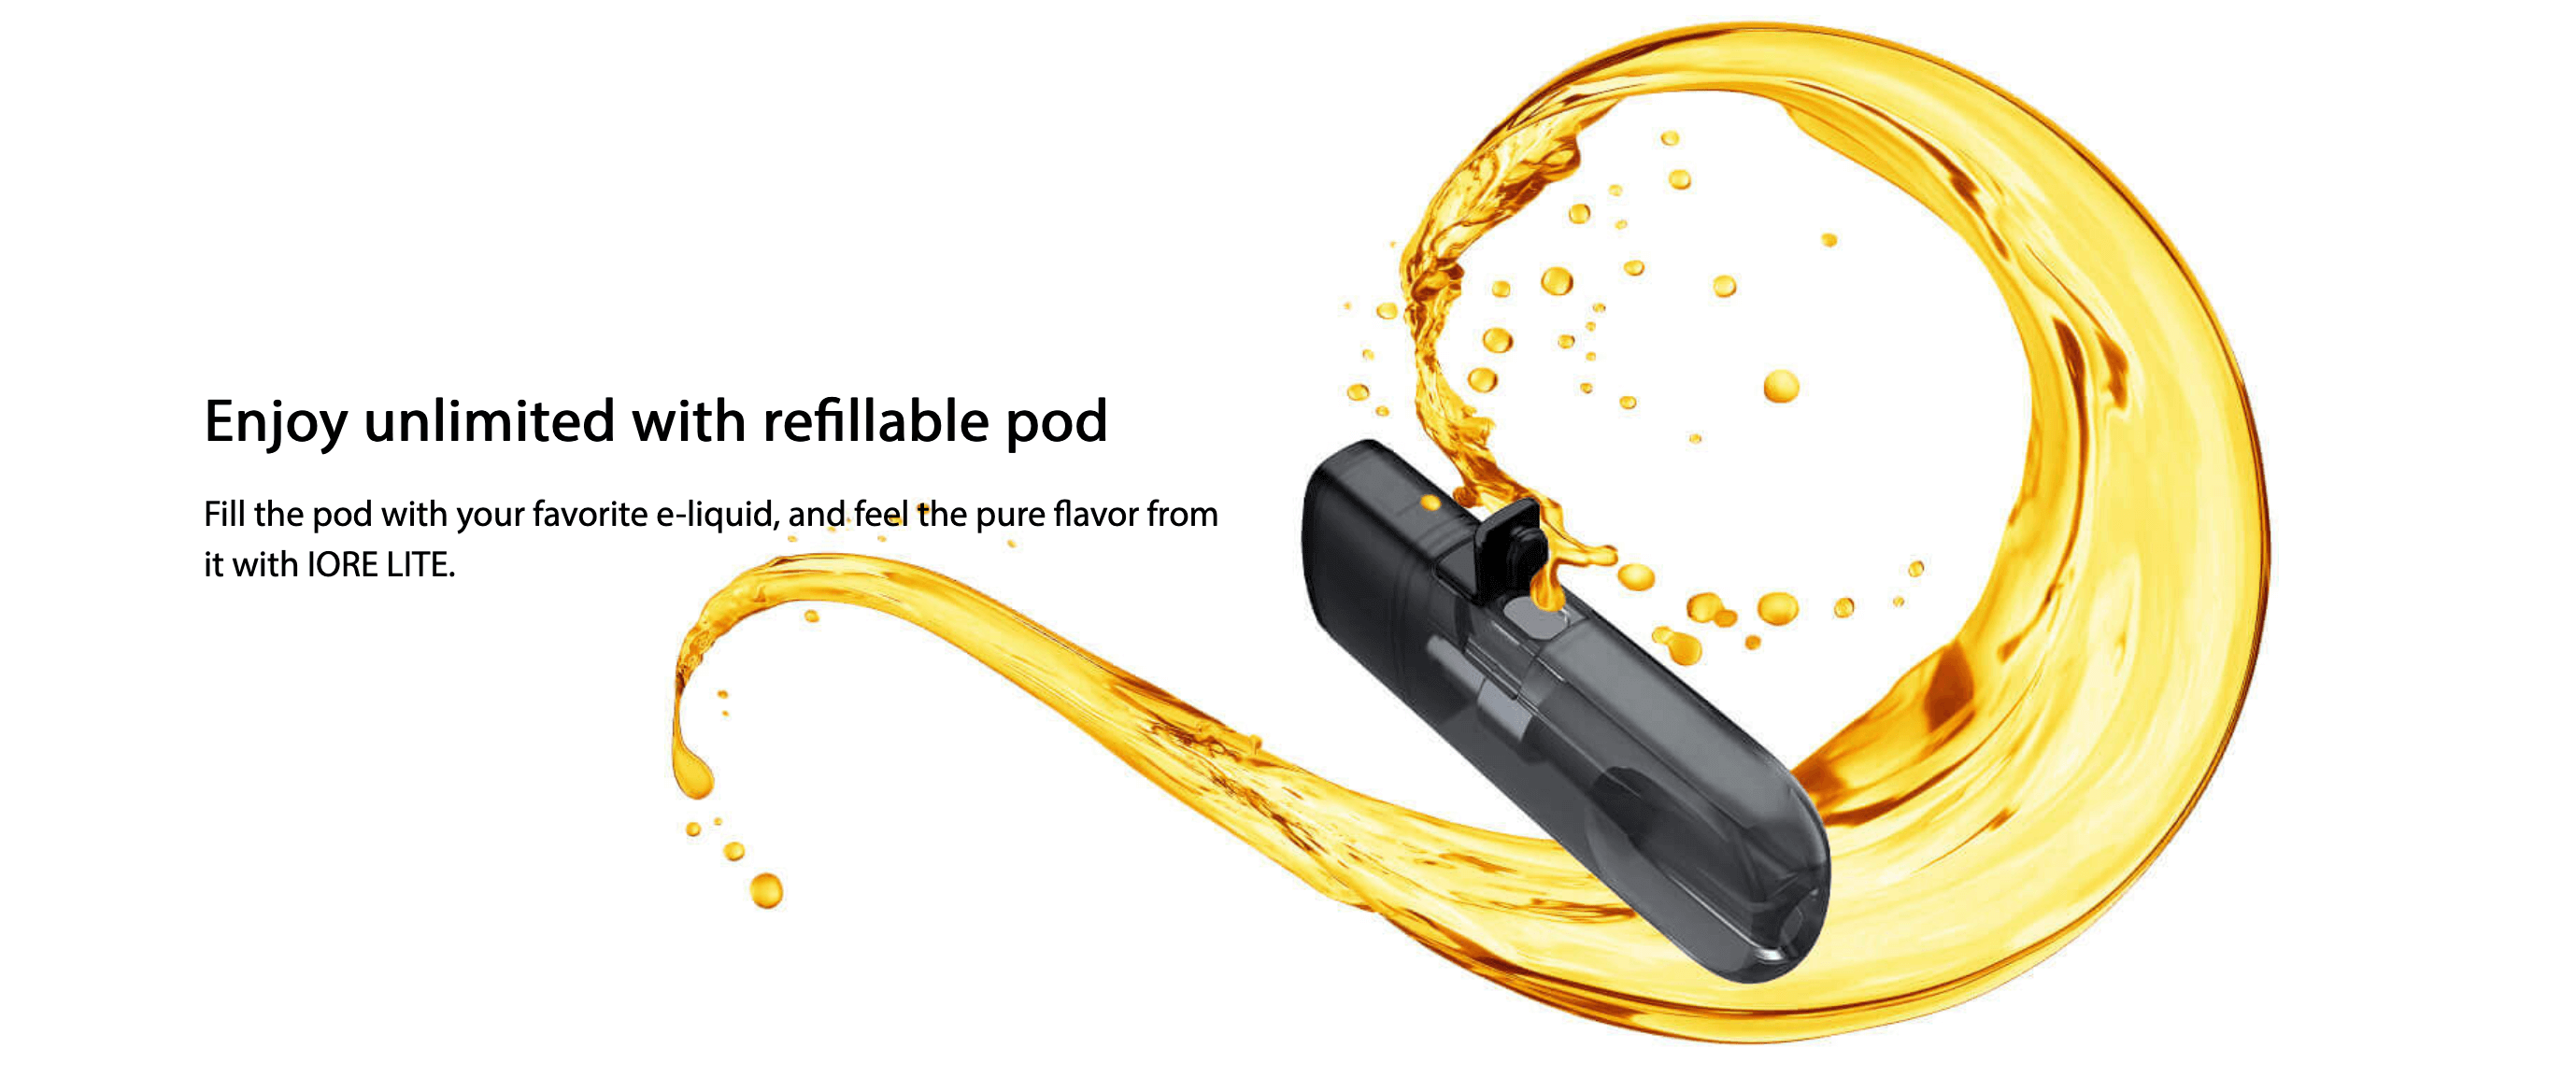 Eleaf IORE LITE - 'enjoy unlimited with refillable pod'.